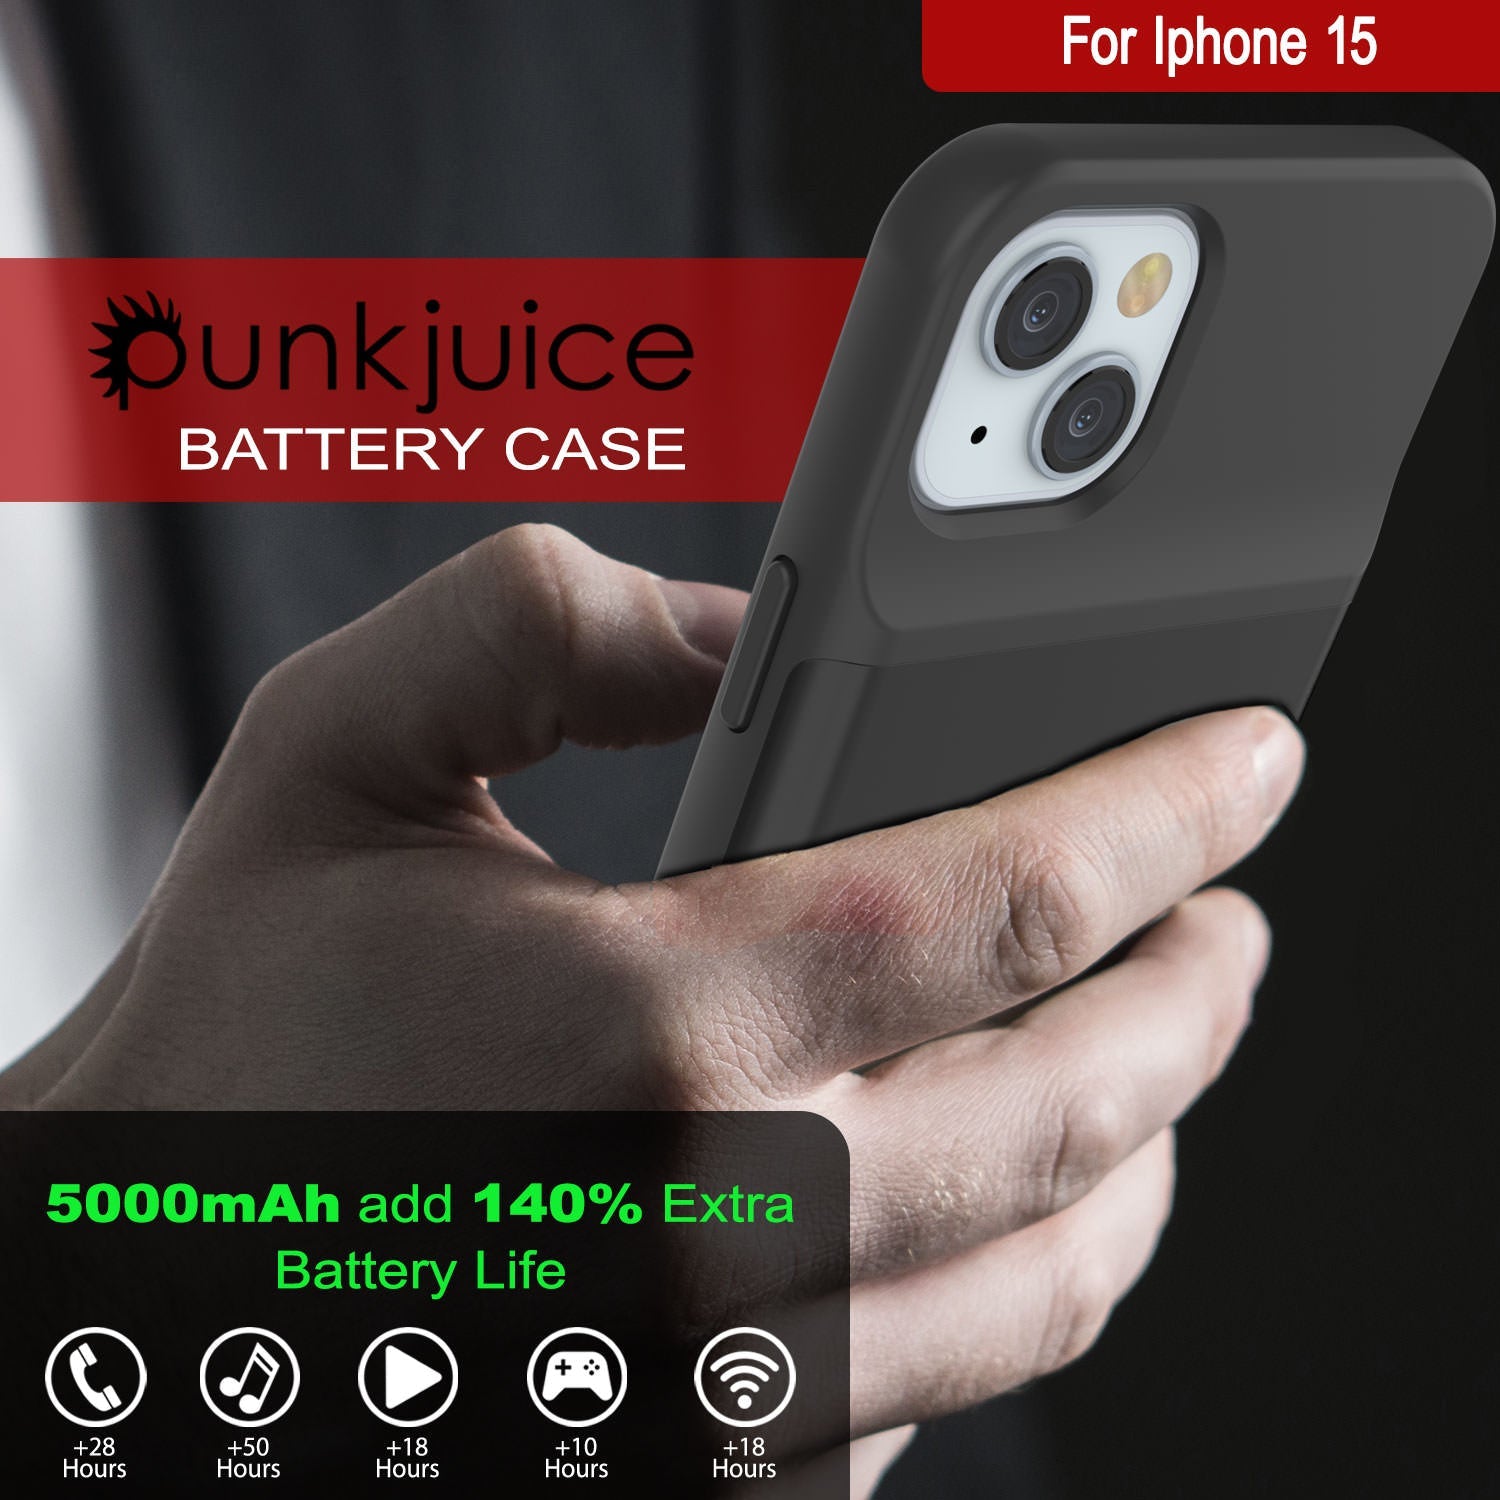 iPhone 15 Battery Case, PunkJuice 5000mAH Fast Charging Power Bank W/ Screen Protector | [Black]